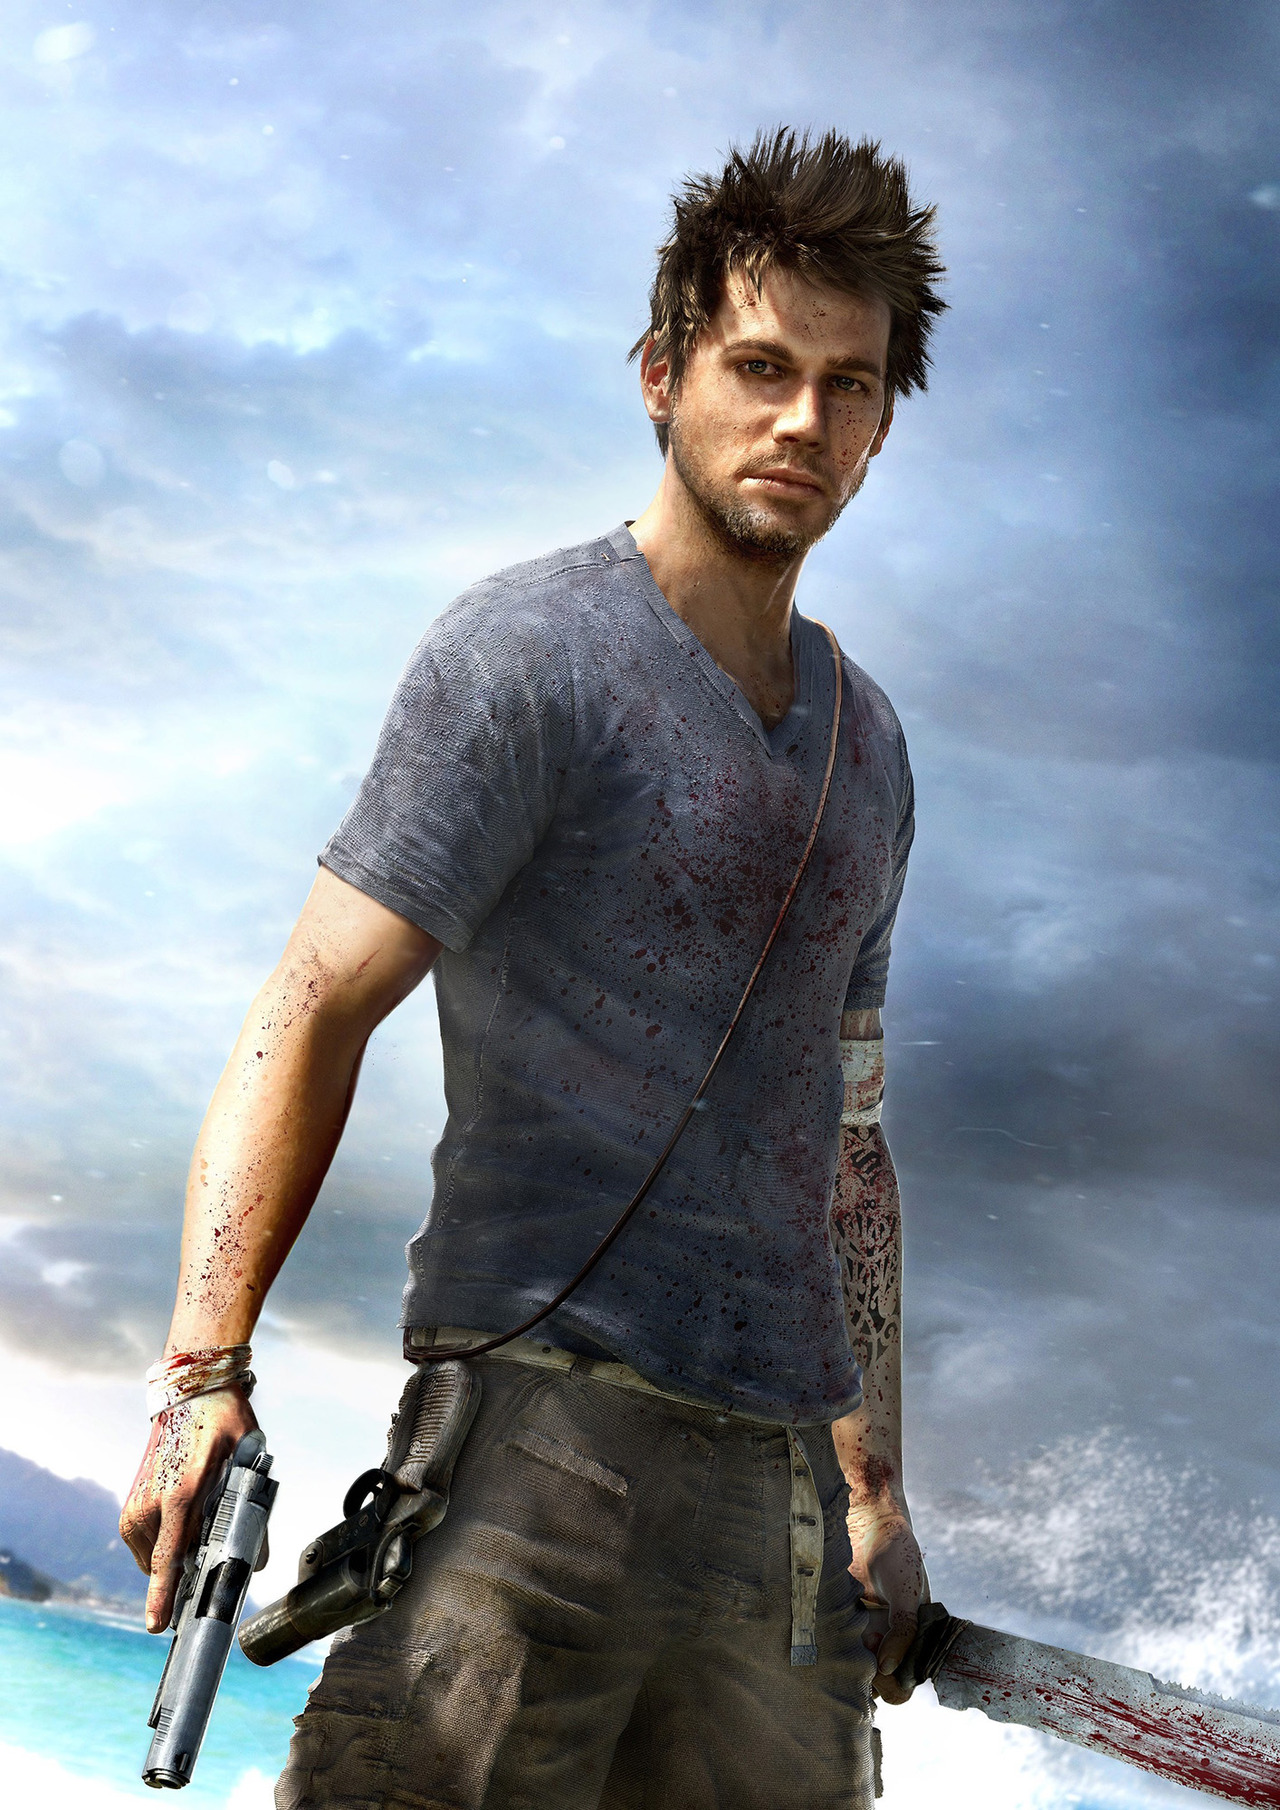 http://images3.wikia.nocookie.net/__cb20121204214640/farcry/images/a/ab/Jason_Brody.jpg